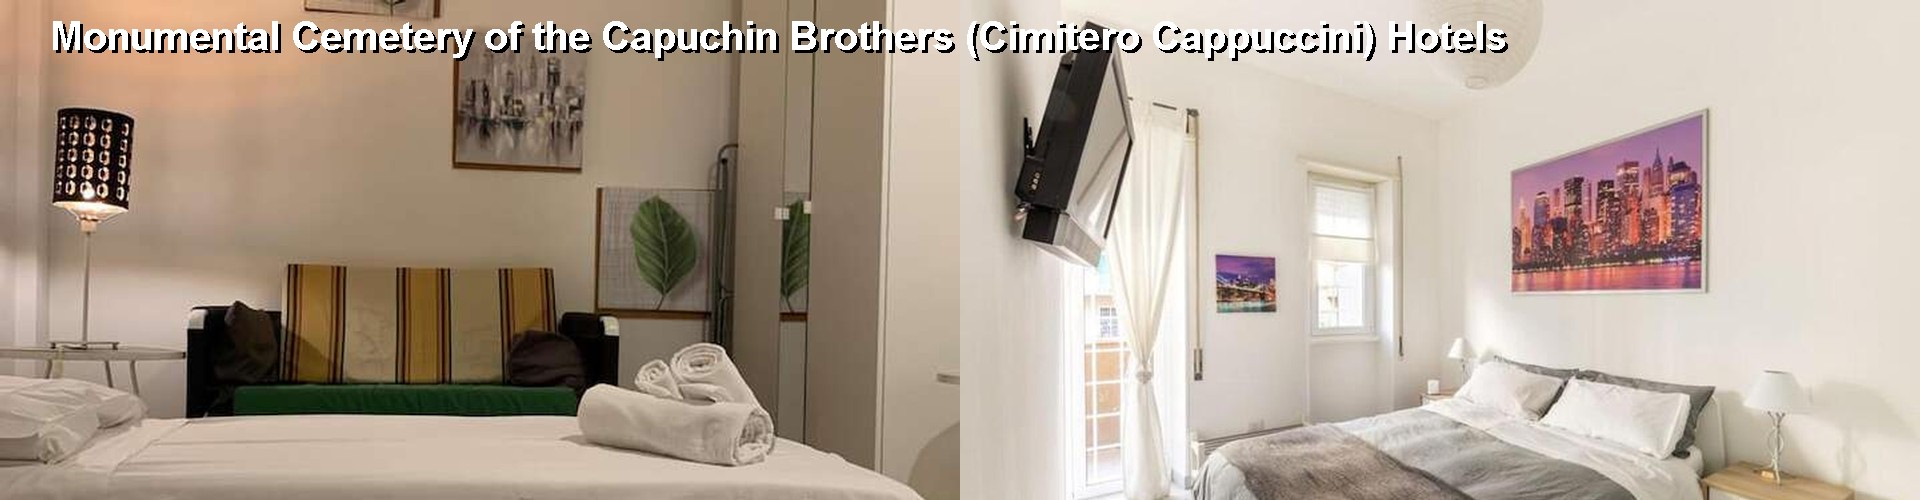 5 Best Hotels near Monumental Cemetery of the Capuchin Brothers (Cimitero Cappuccini)